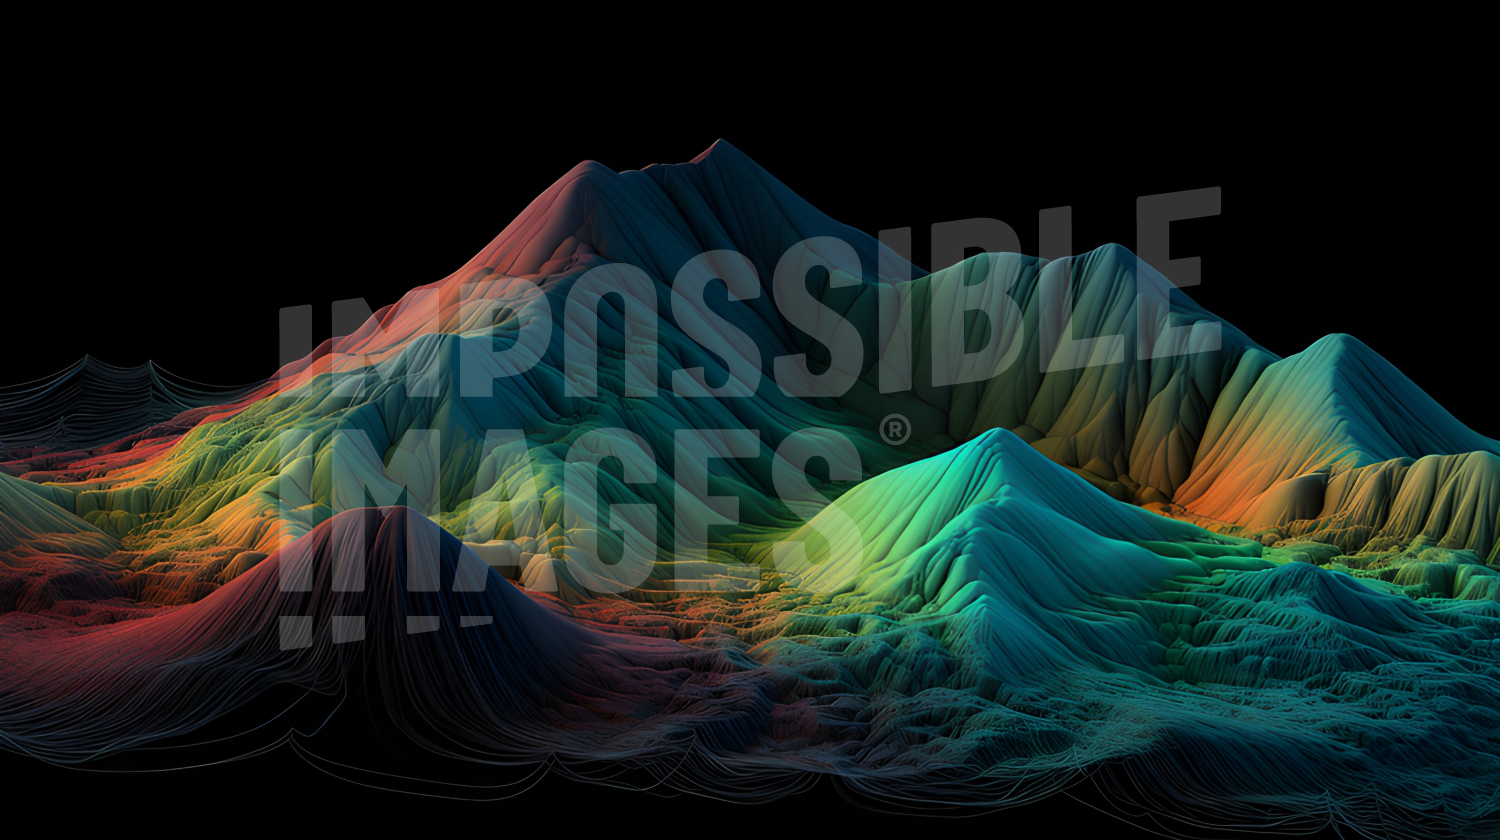 A computer generated image of a mountain range